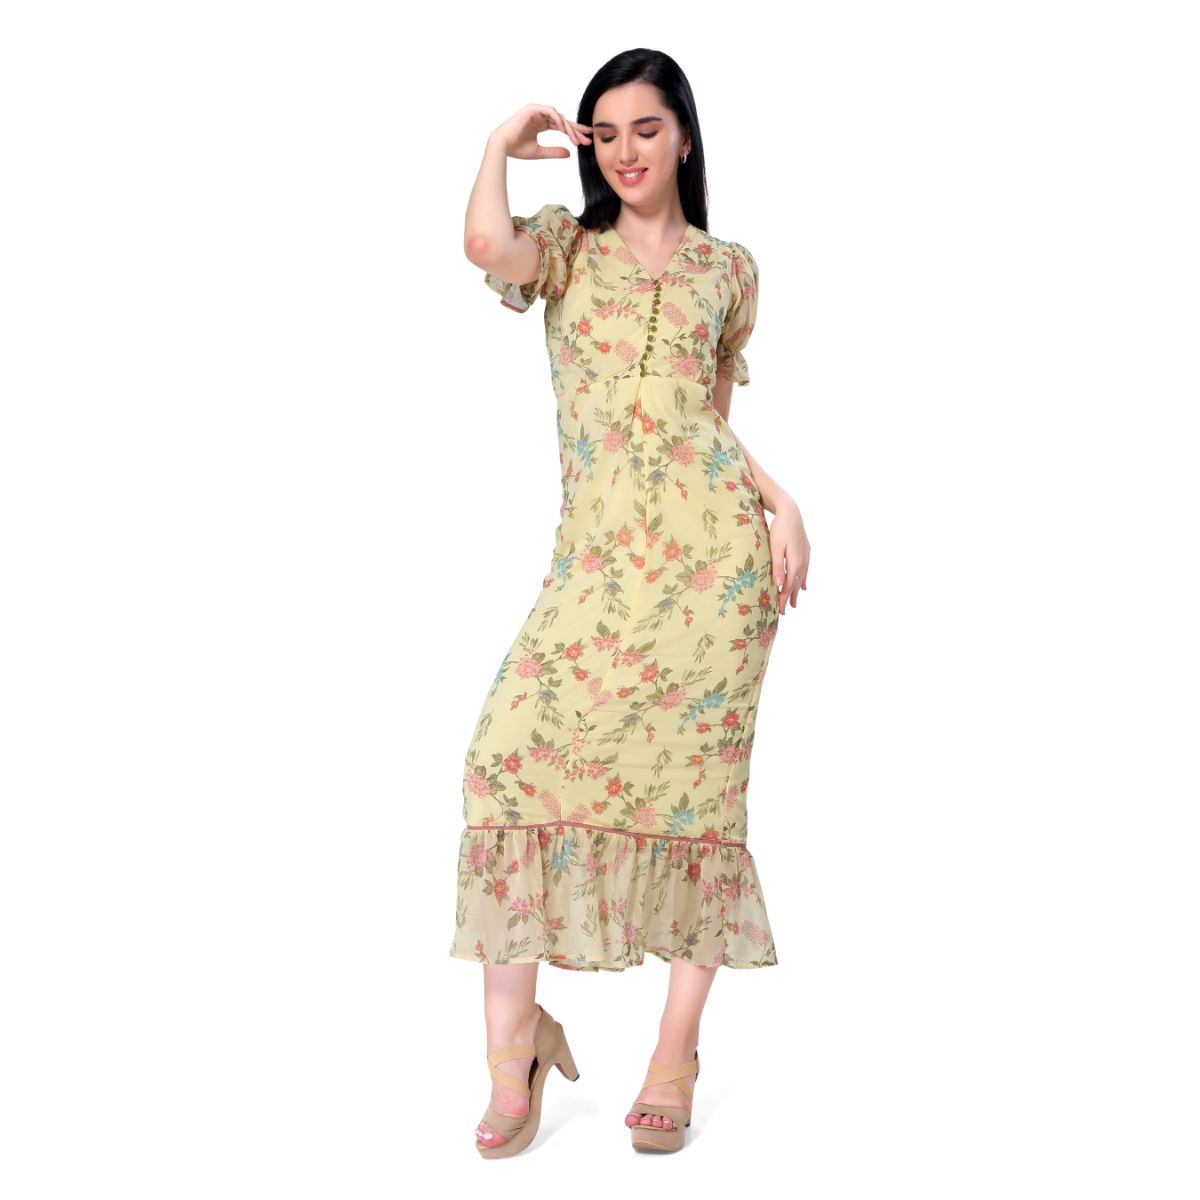 Mantra yellow floral printed trumpet dress